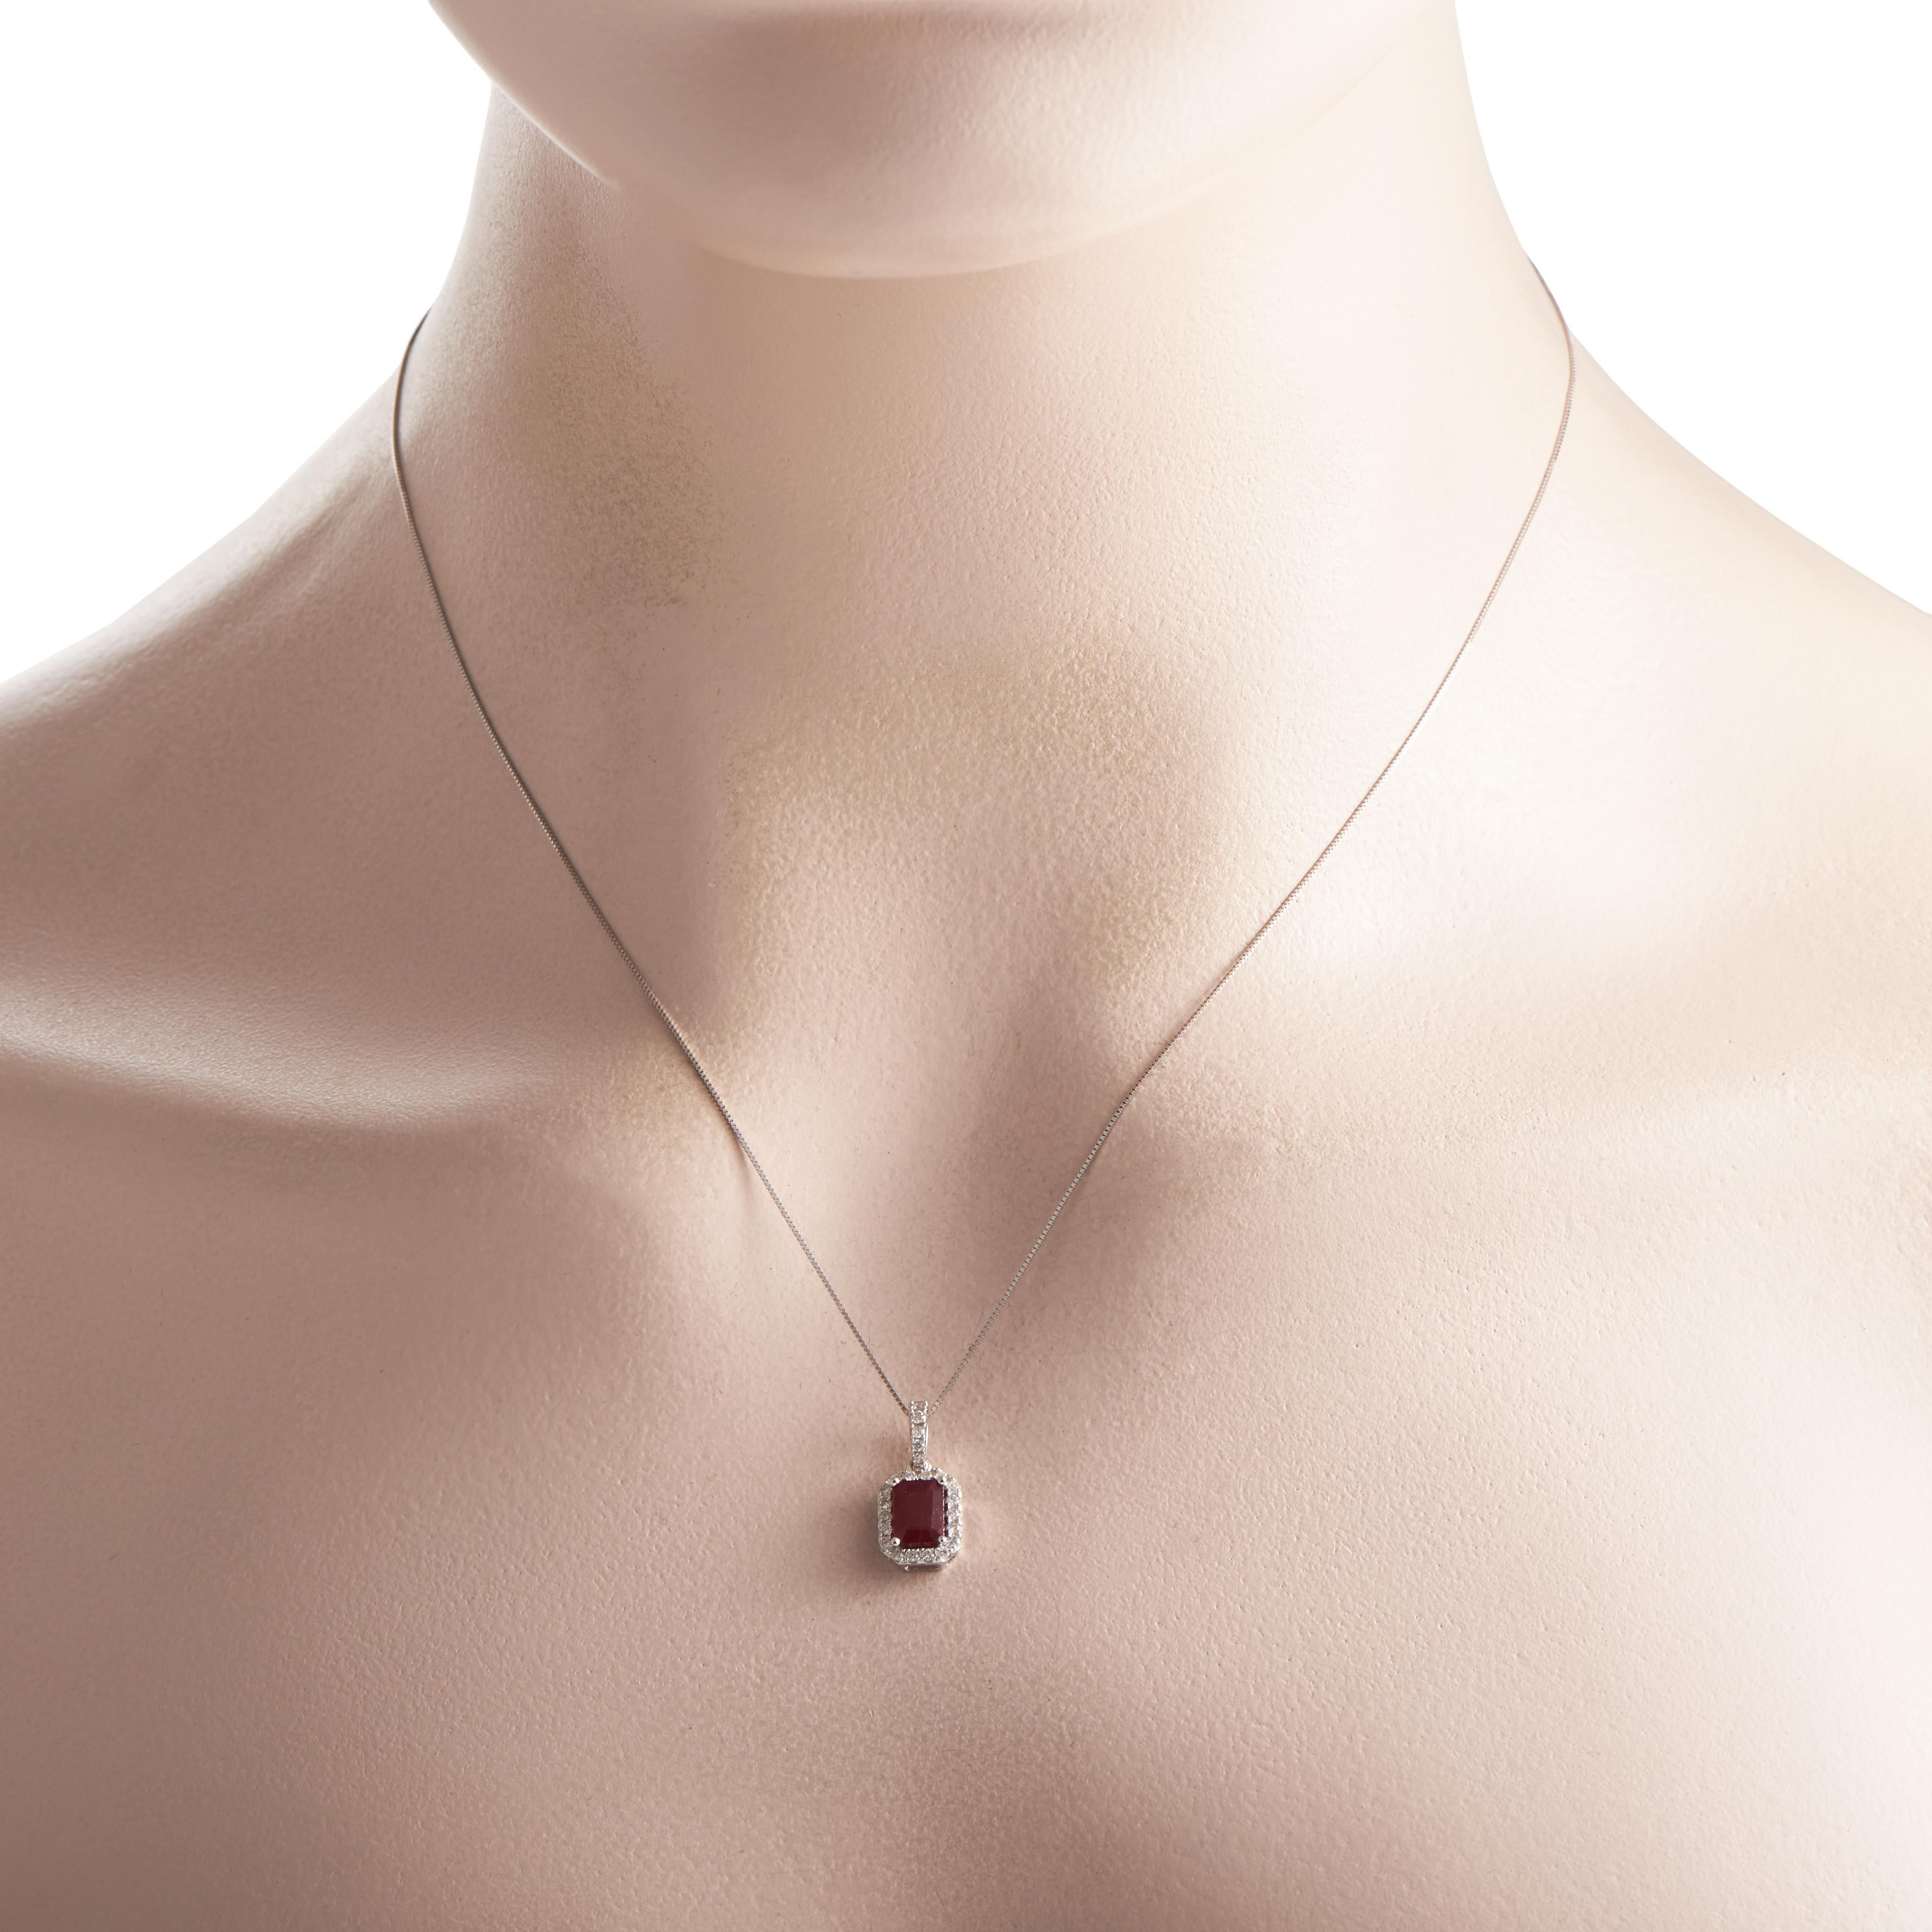 This necklace makes it easier to add a vintage flair to your looks. Crafted in 14K white gold, this LB Exclusive necklace has a 1.28 carat step-cut ruby pendant surrounded by 0.20 carats of round diamonds. It is held by a diamond-traced bail on an